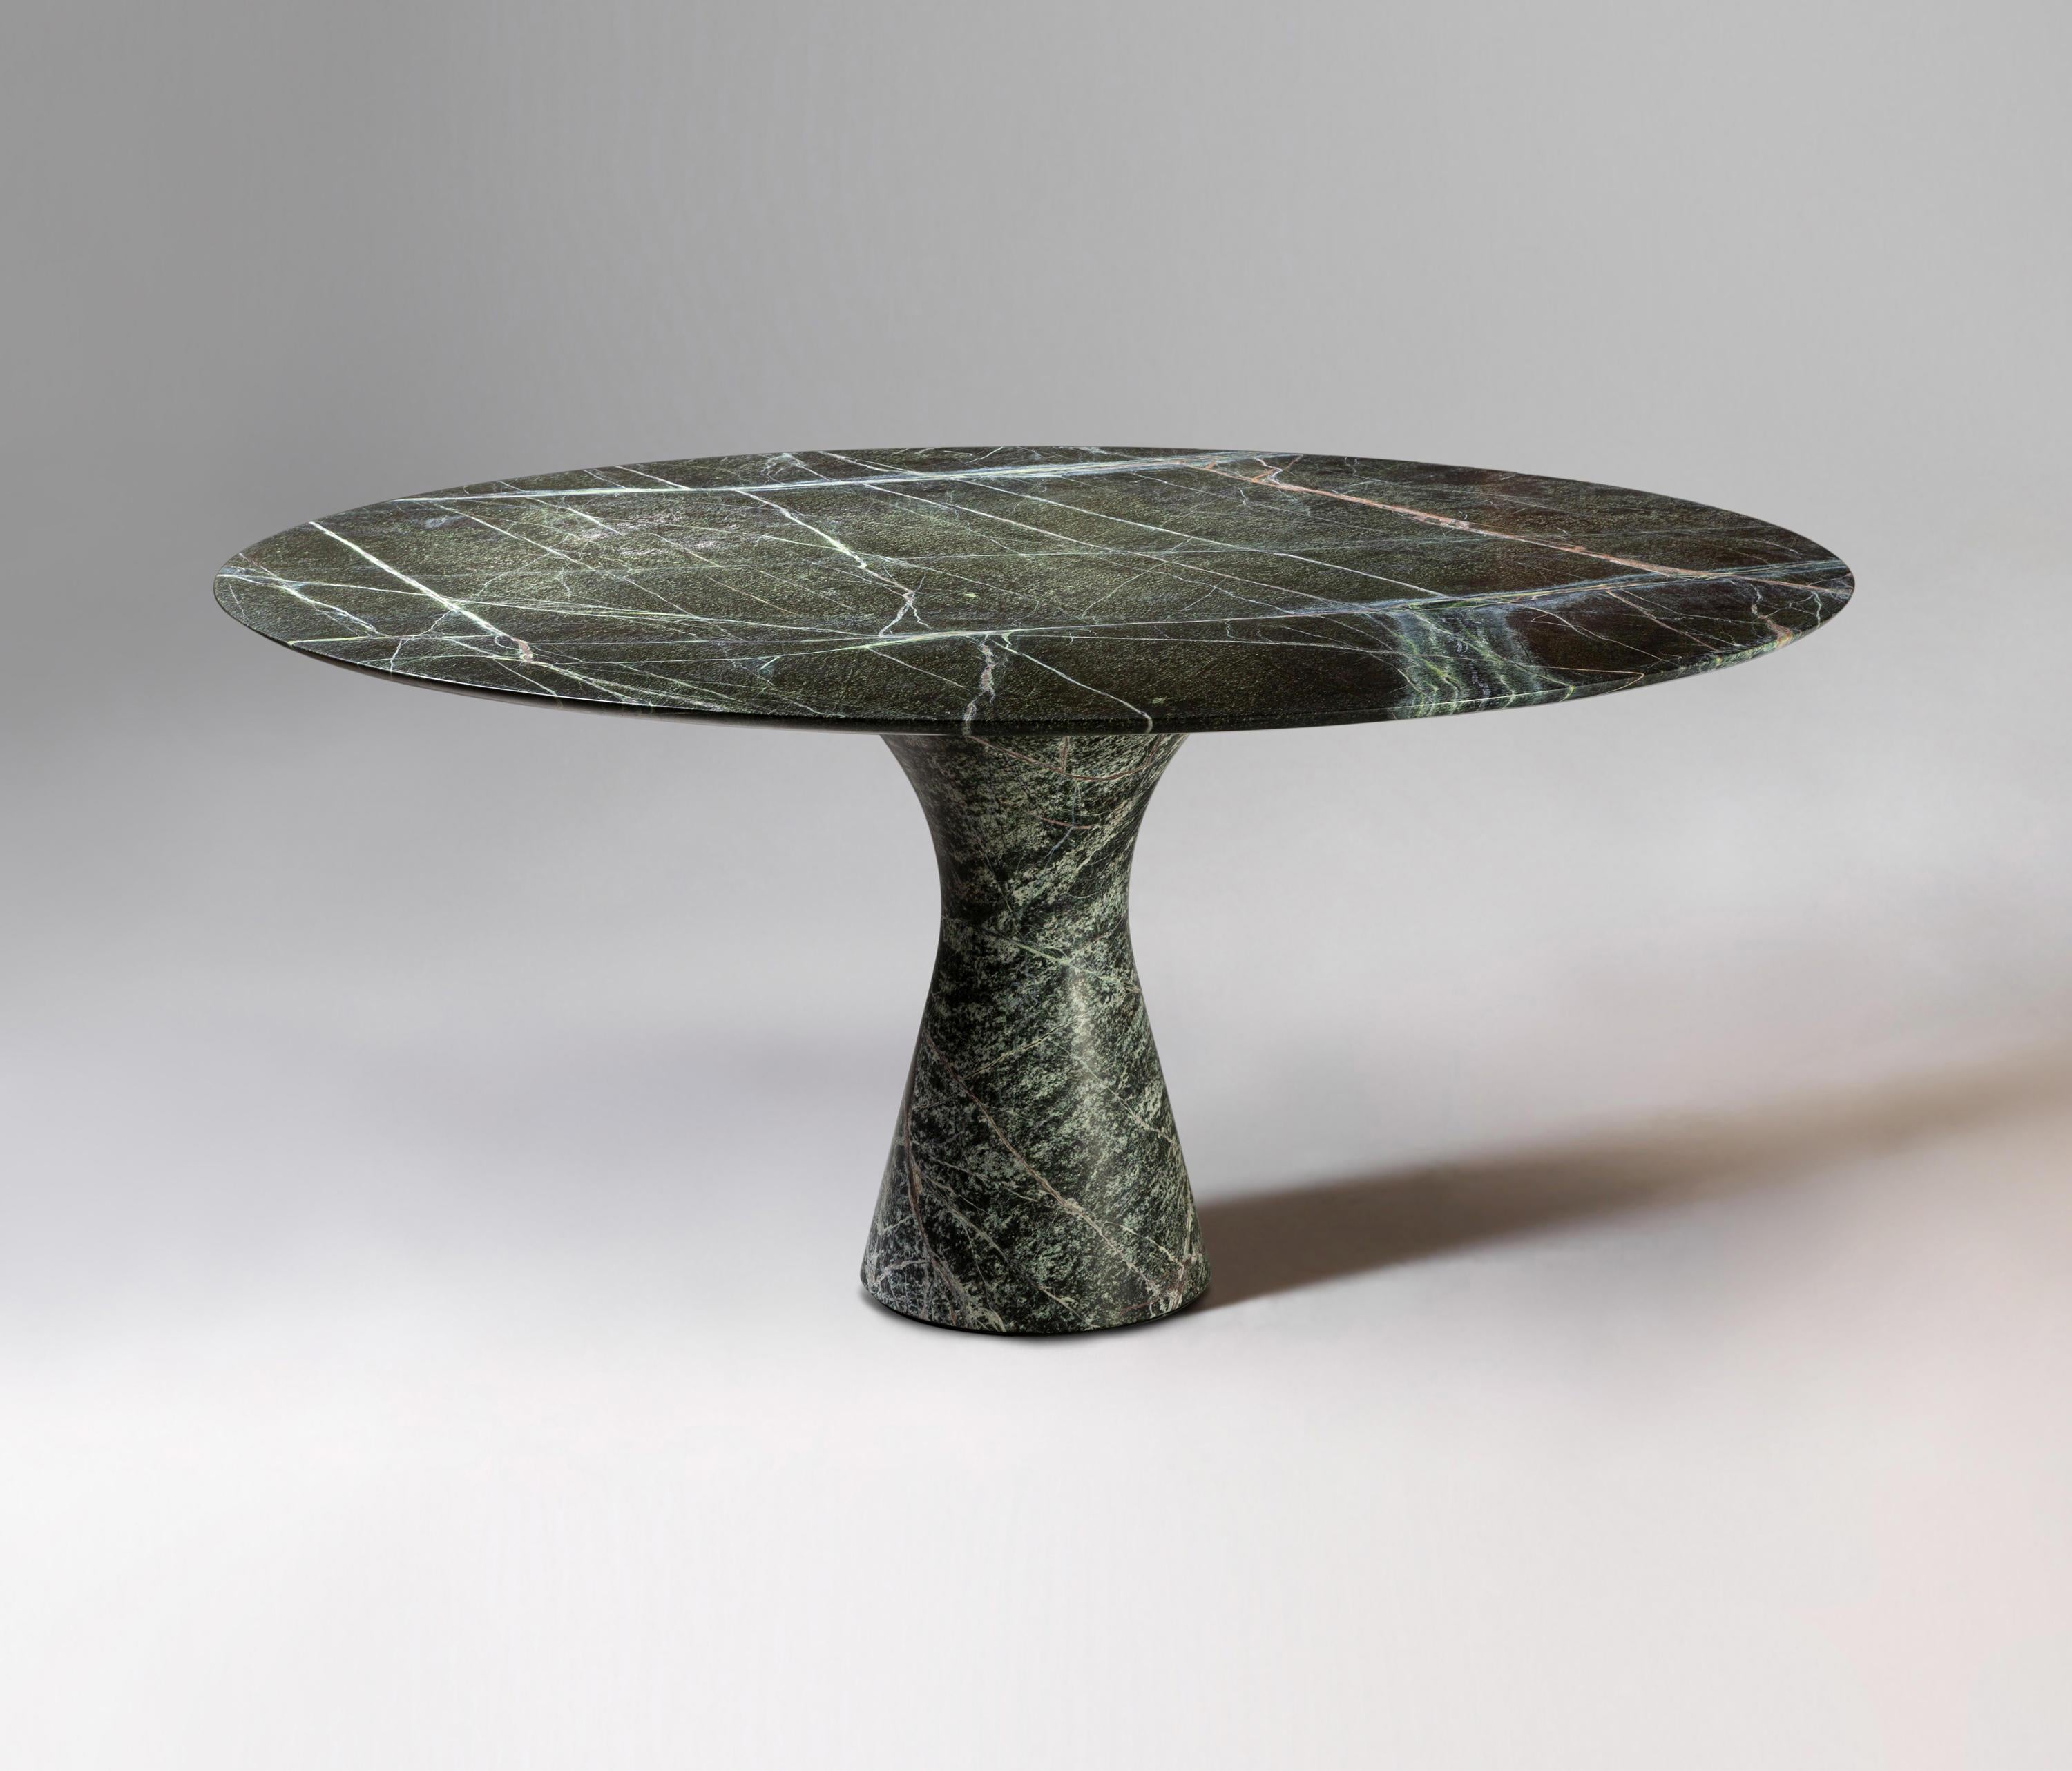 Picasso Green Refined Contemporary Marble Dining Table 180/75
Dimensions: 180 x 75 cm
Materials: Picasso green

Angelo is the essence of a round table in natural stone, a sculptural shape in robust material with elegant lines and refined